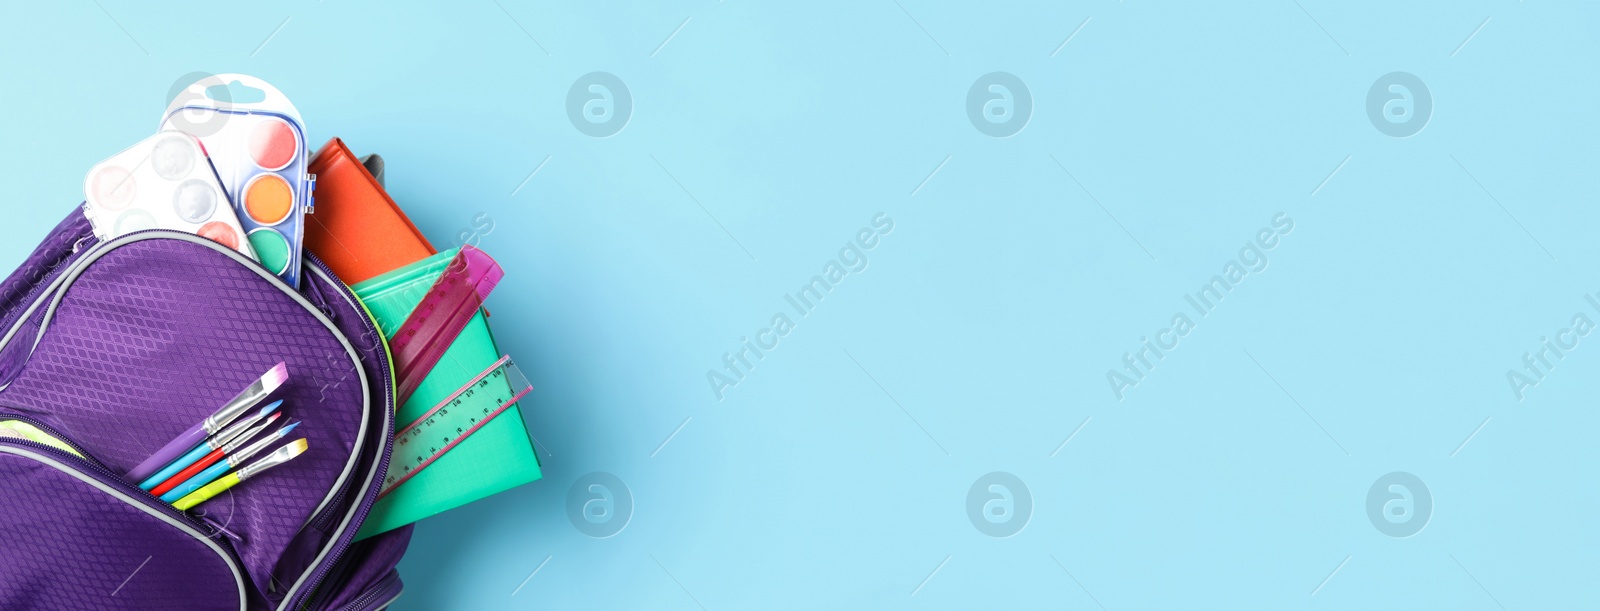 Image of Stylish backpack with different school stationery on light blue background, top view and space for text. Banner design